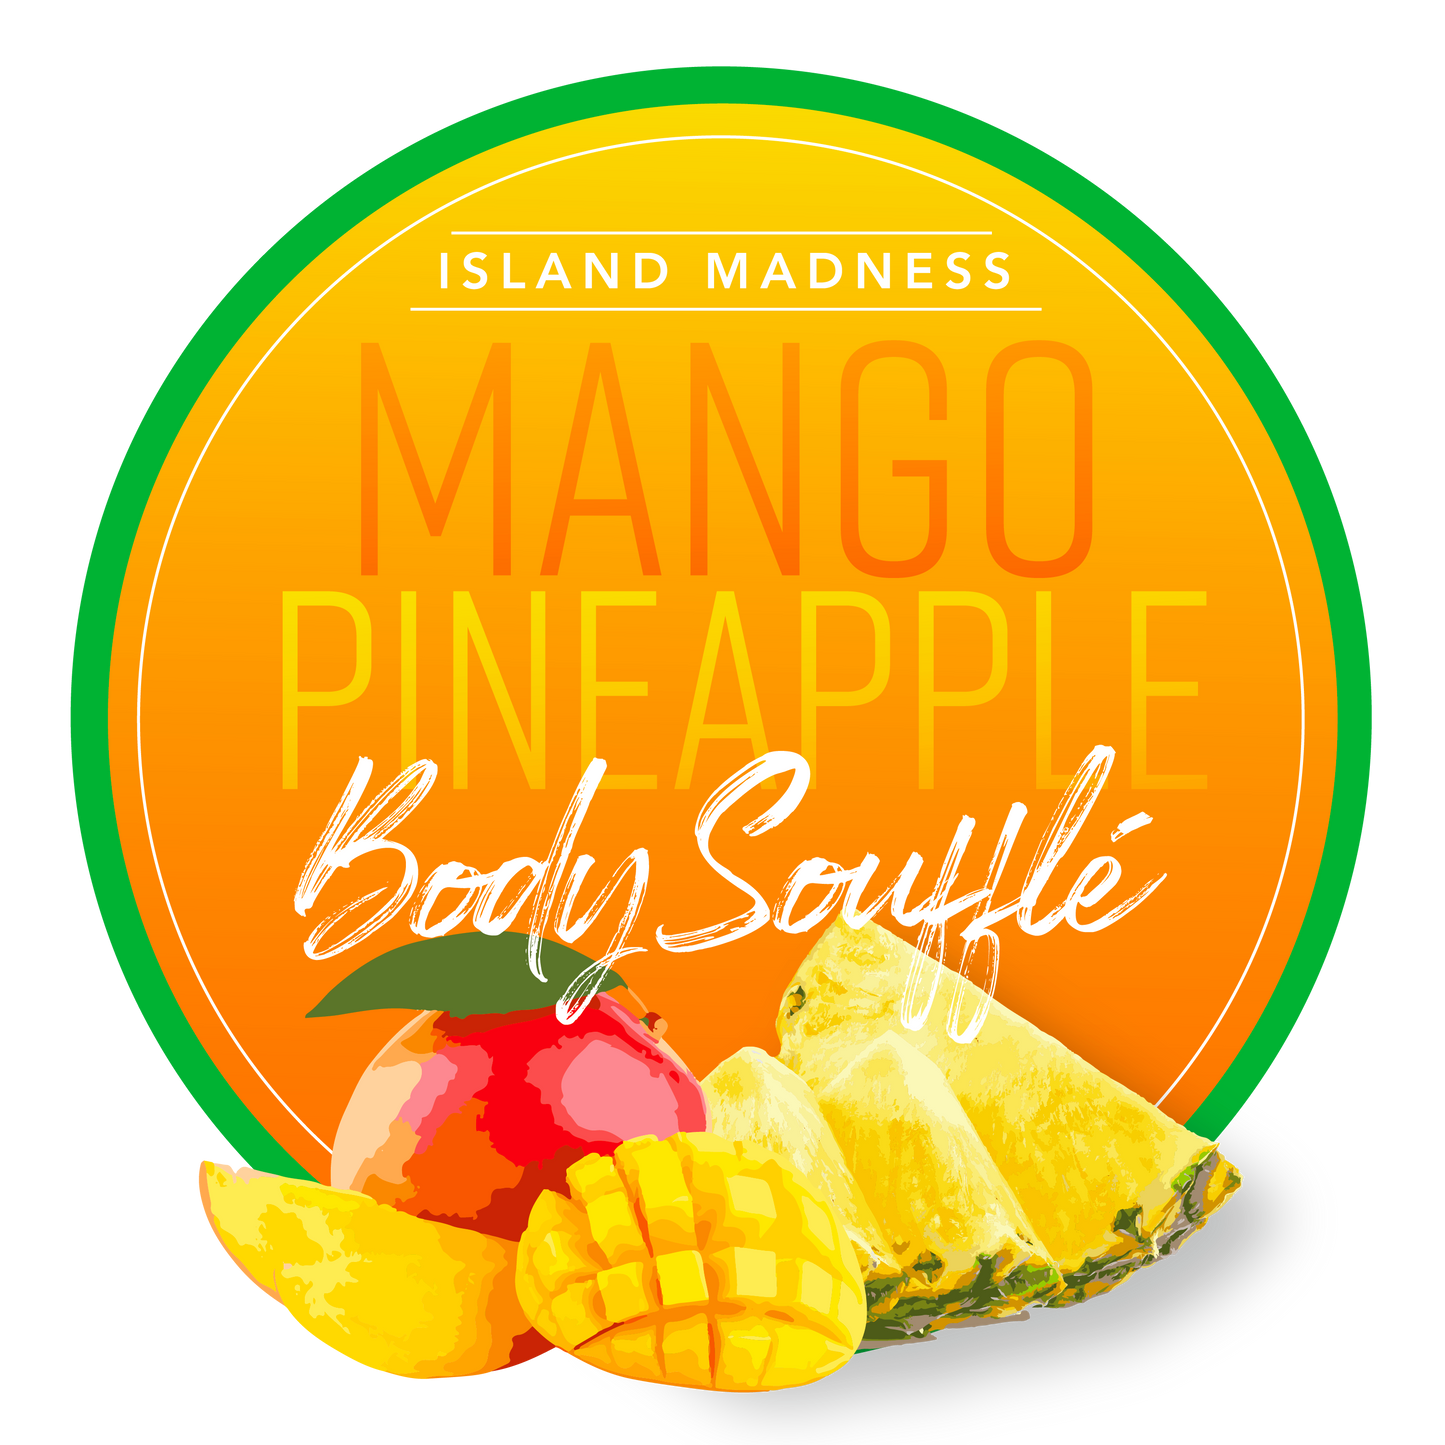 Island Madness Collection Mango Pineapple Watering Soule